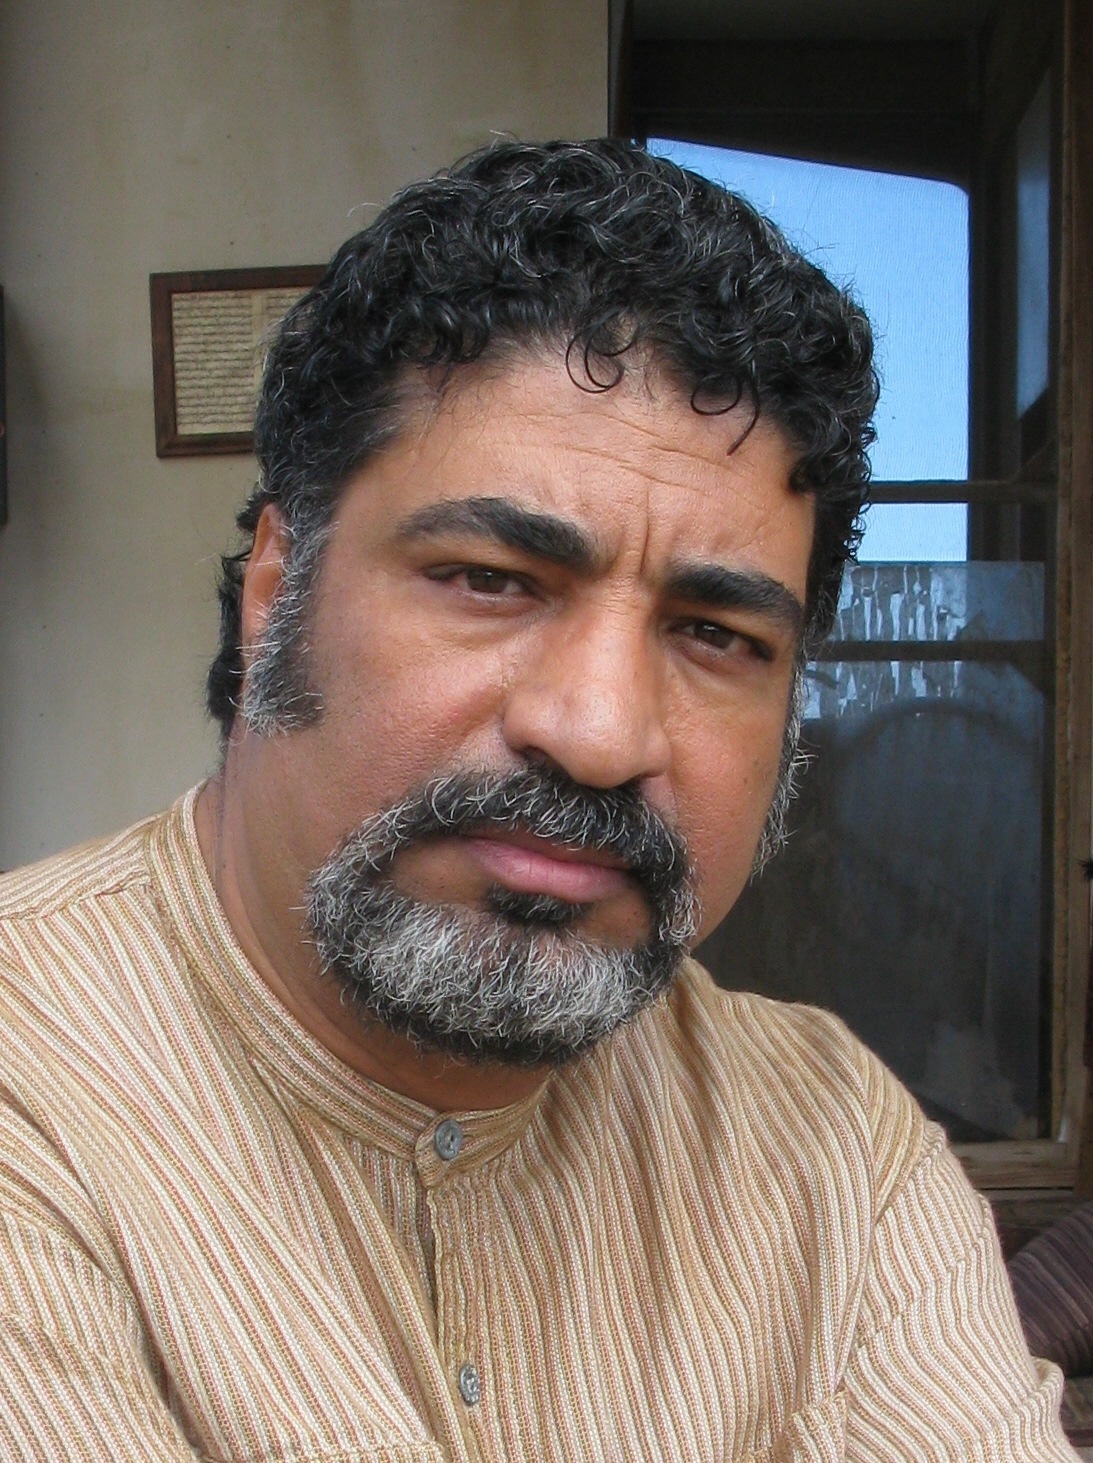 Sayed Badreya in the TV Show Lost